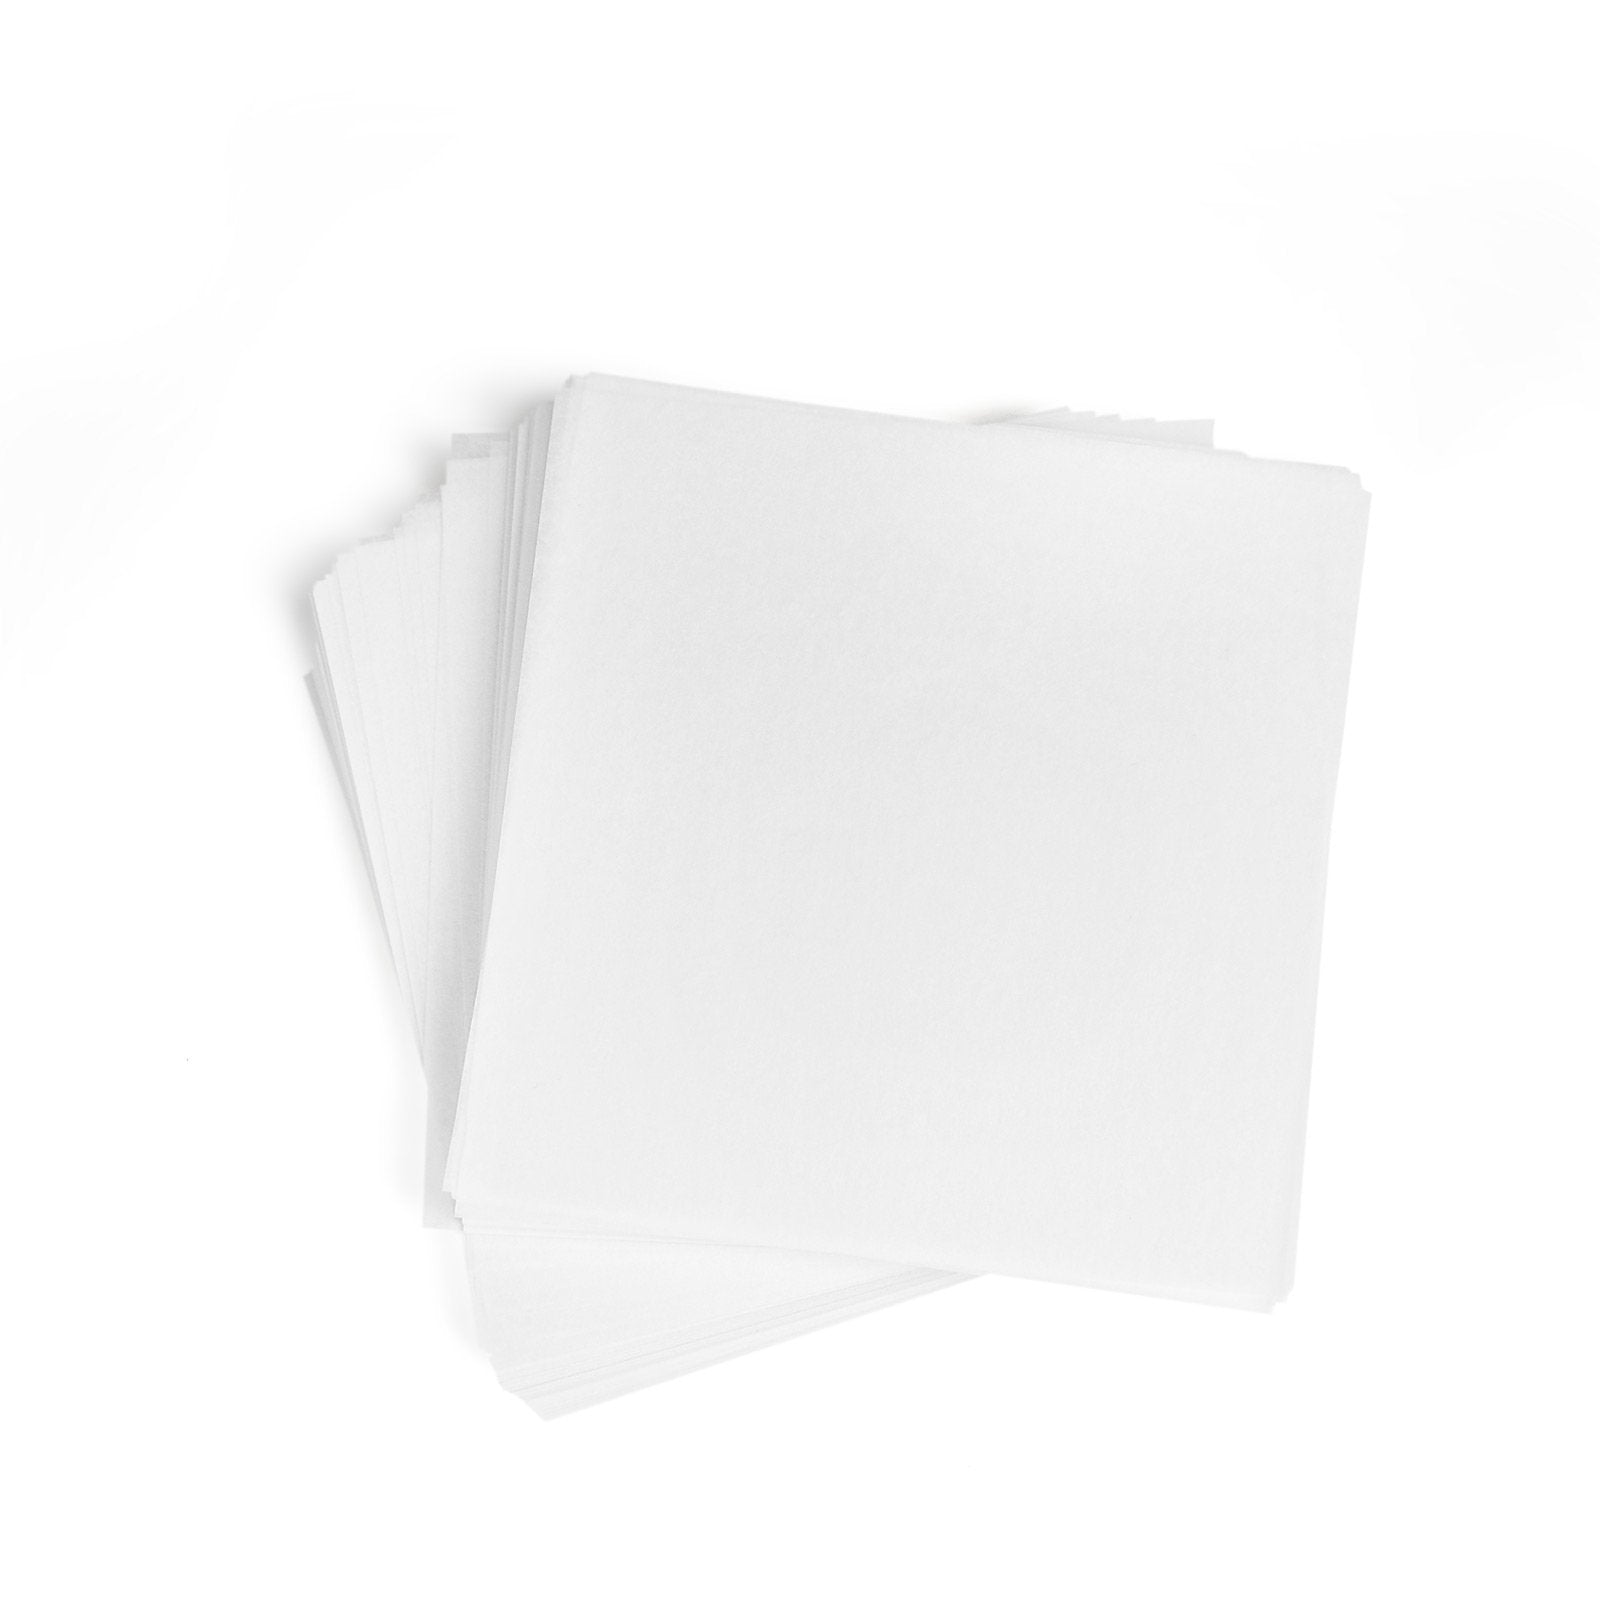 4 X 4 PARCHMENT PAPER SHEETS - SILICONE COATED - 1,000 COUNT – Flower  Power Packages